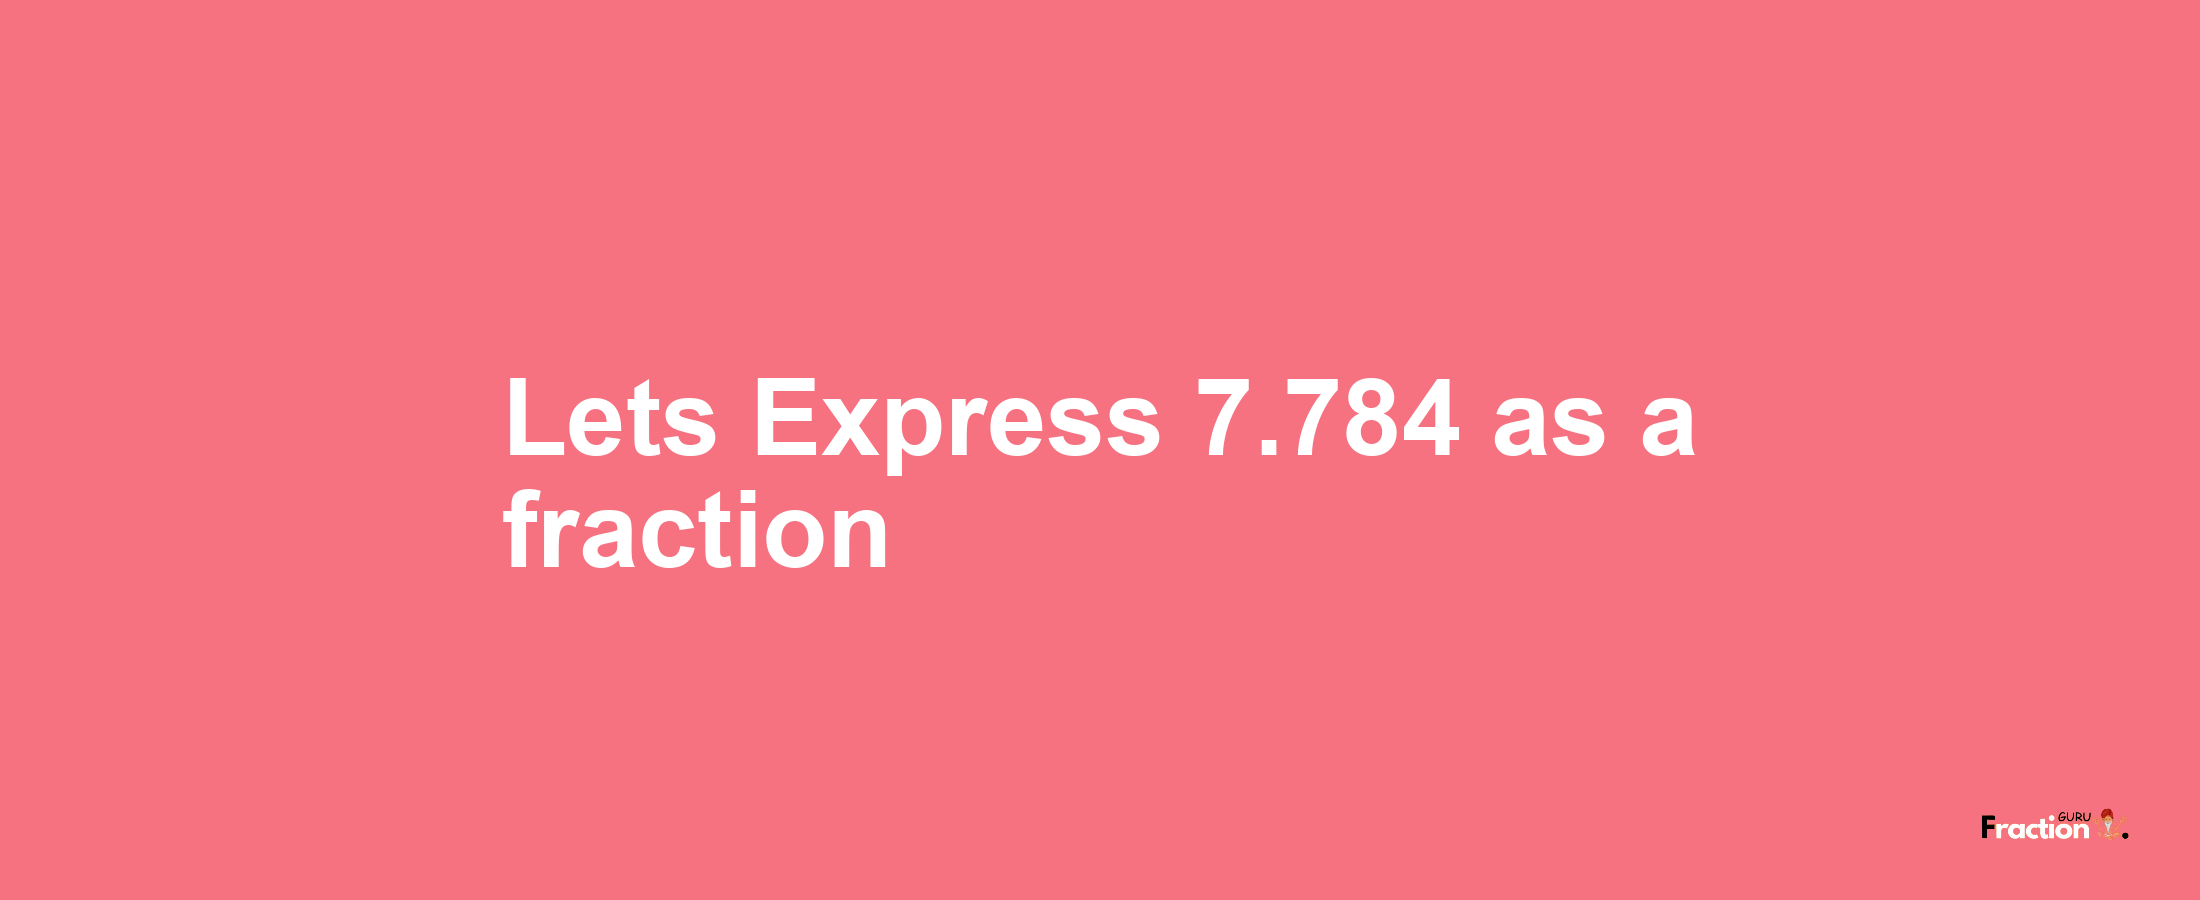 Lets Express 7.784 as afraction